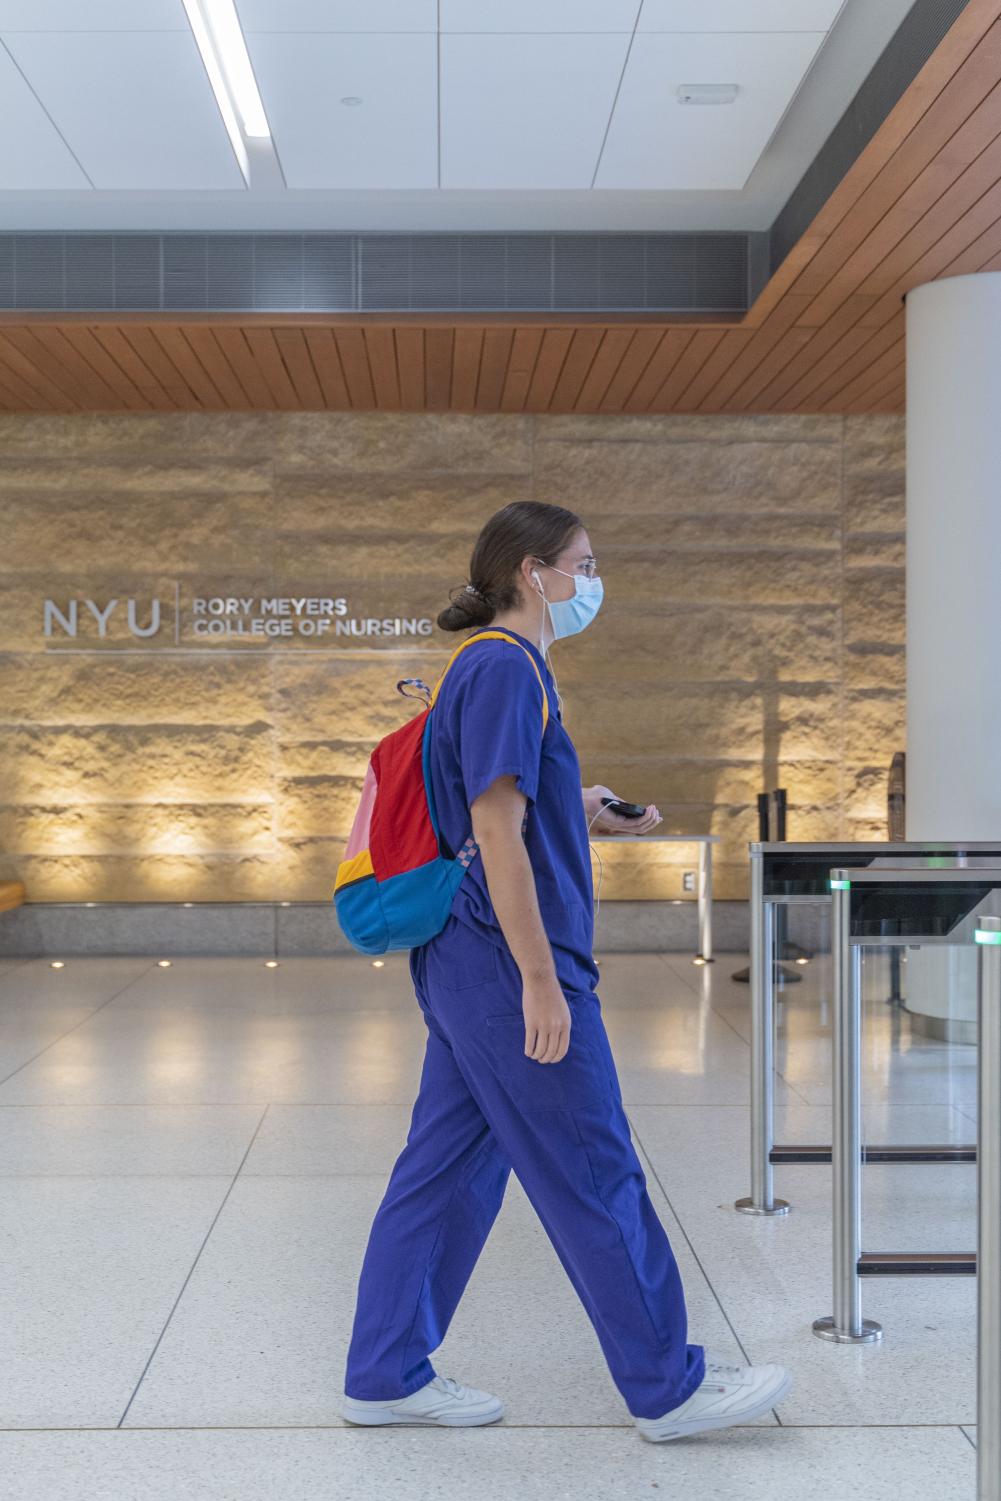 Jessica Alvarez walks in the lobby of a Meyers building wearing purple scrubs and a multicolored backpack.